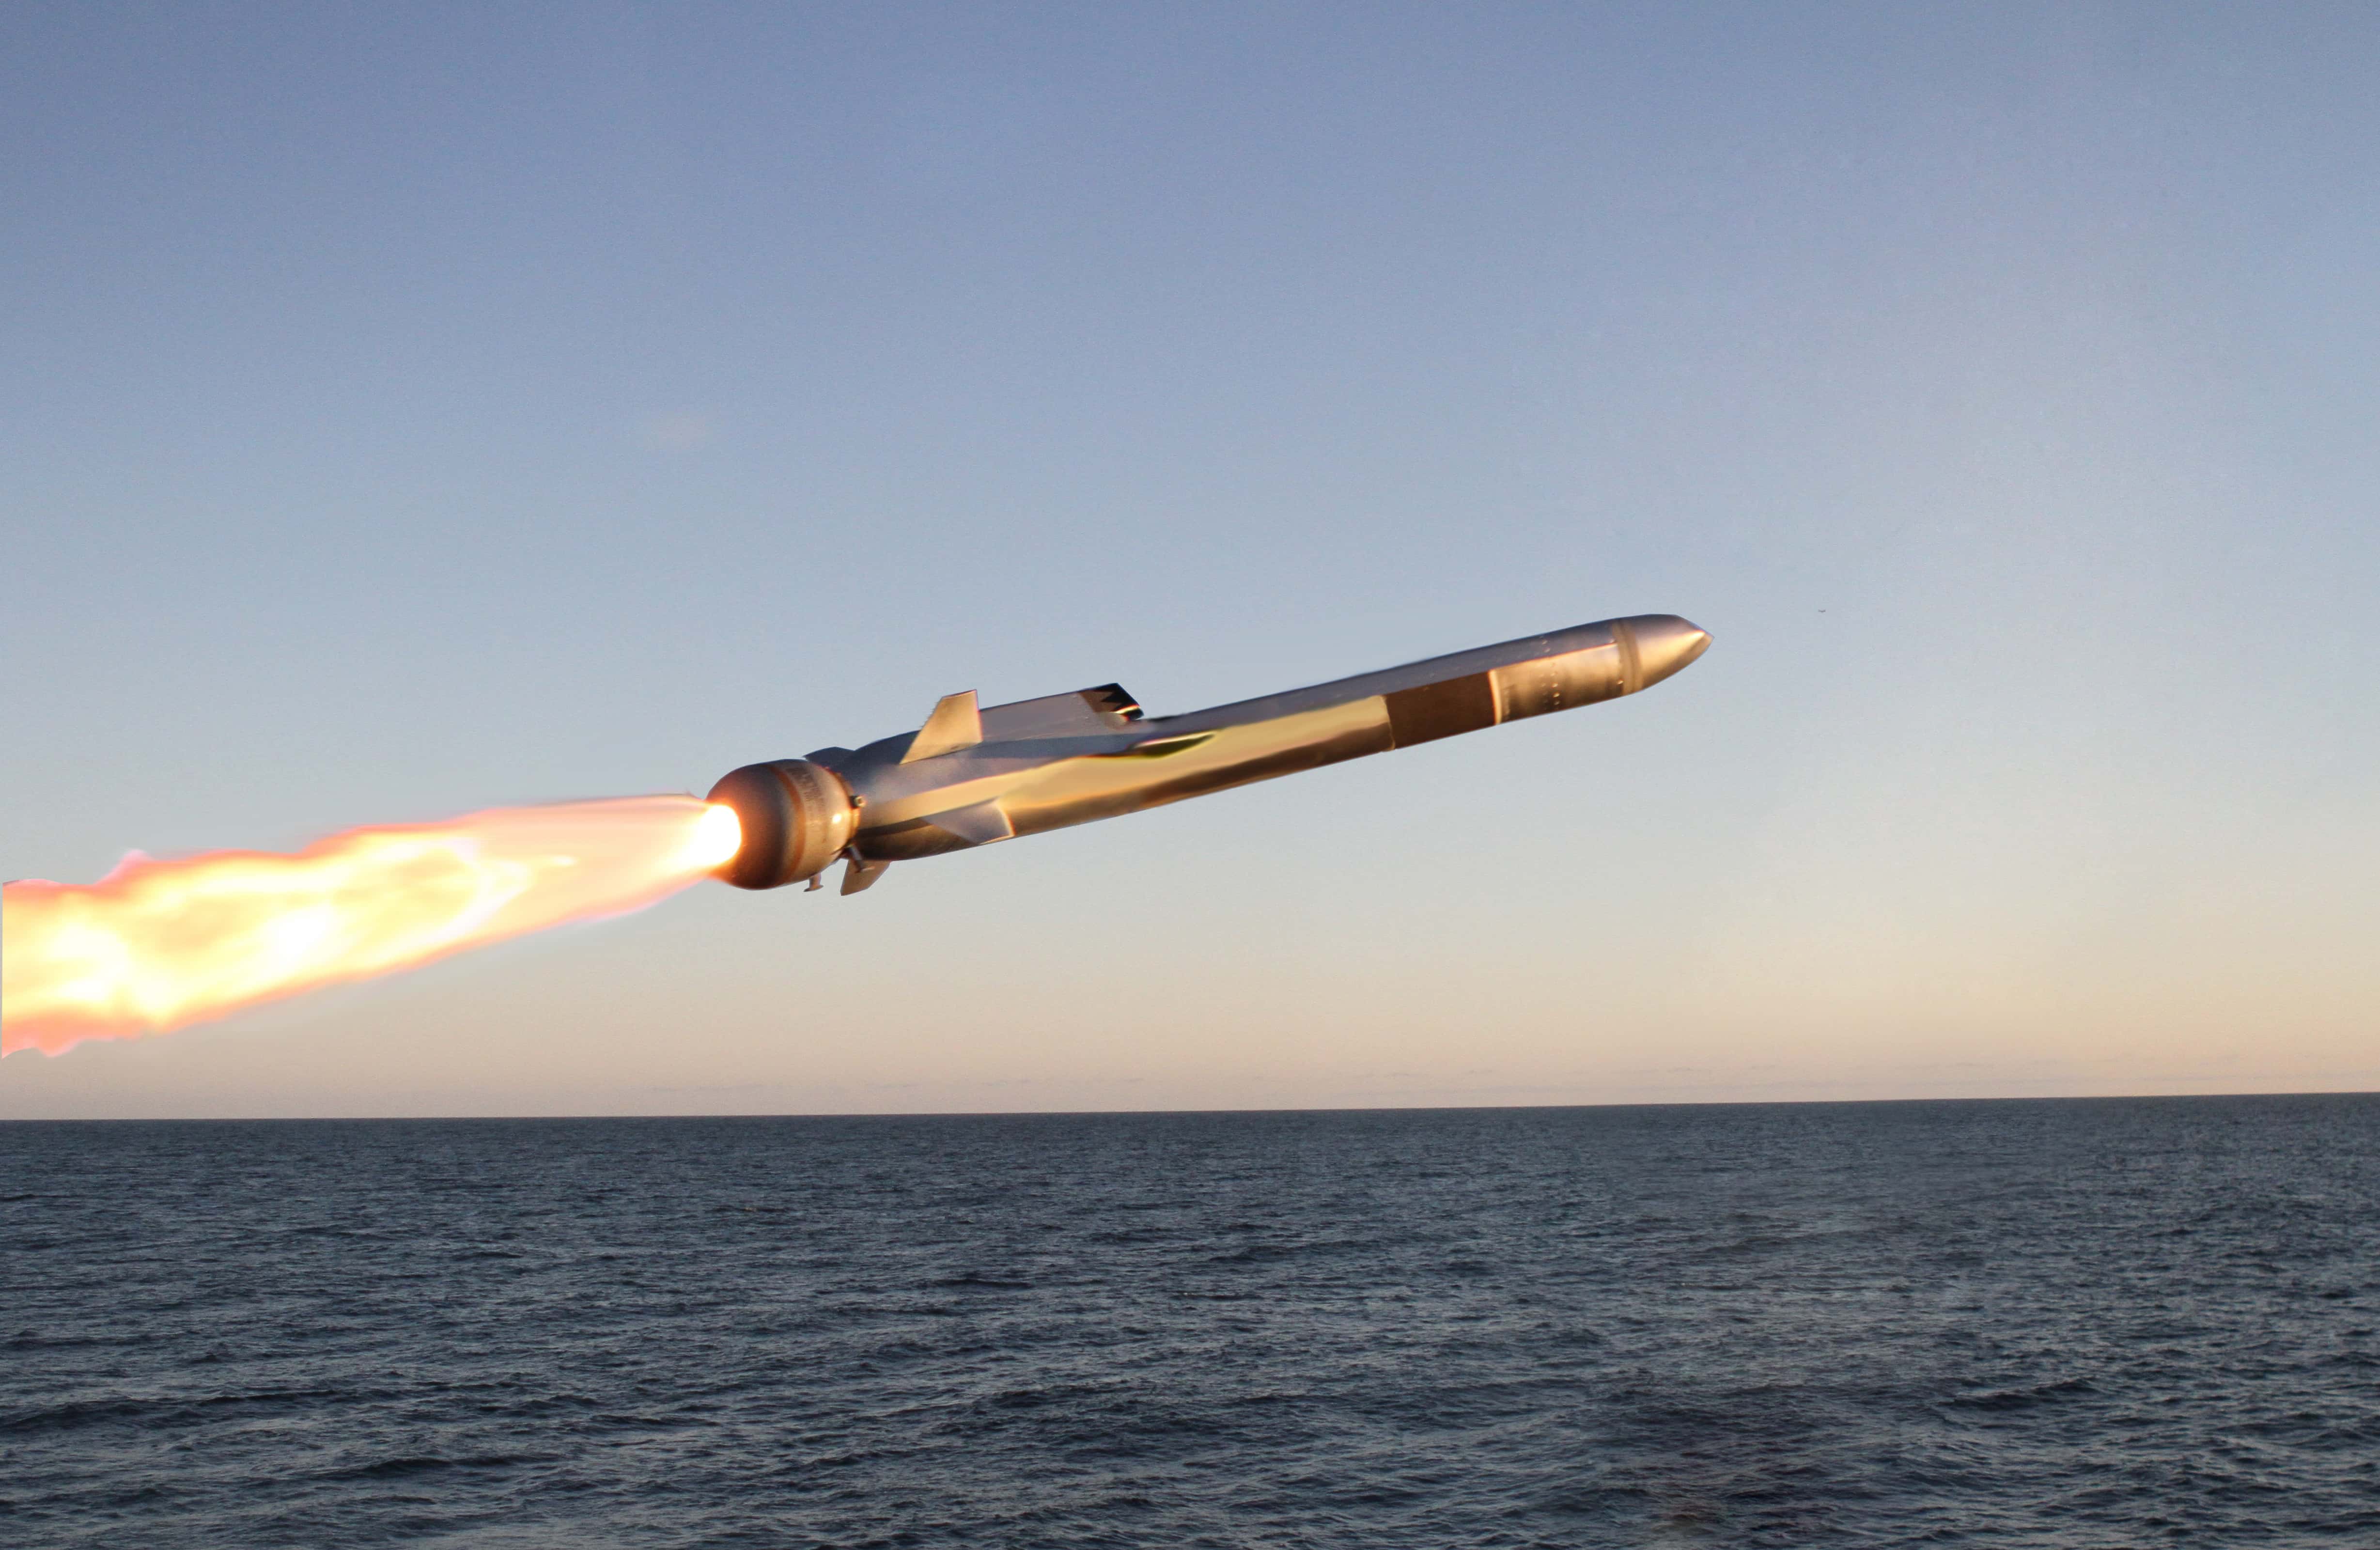 This Norwegian missile could make the LCS a lot deadlier